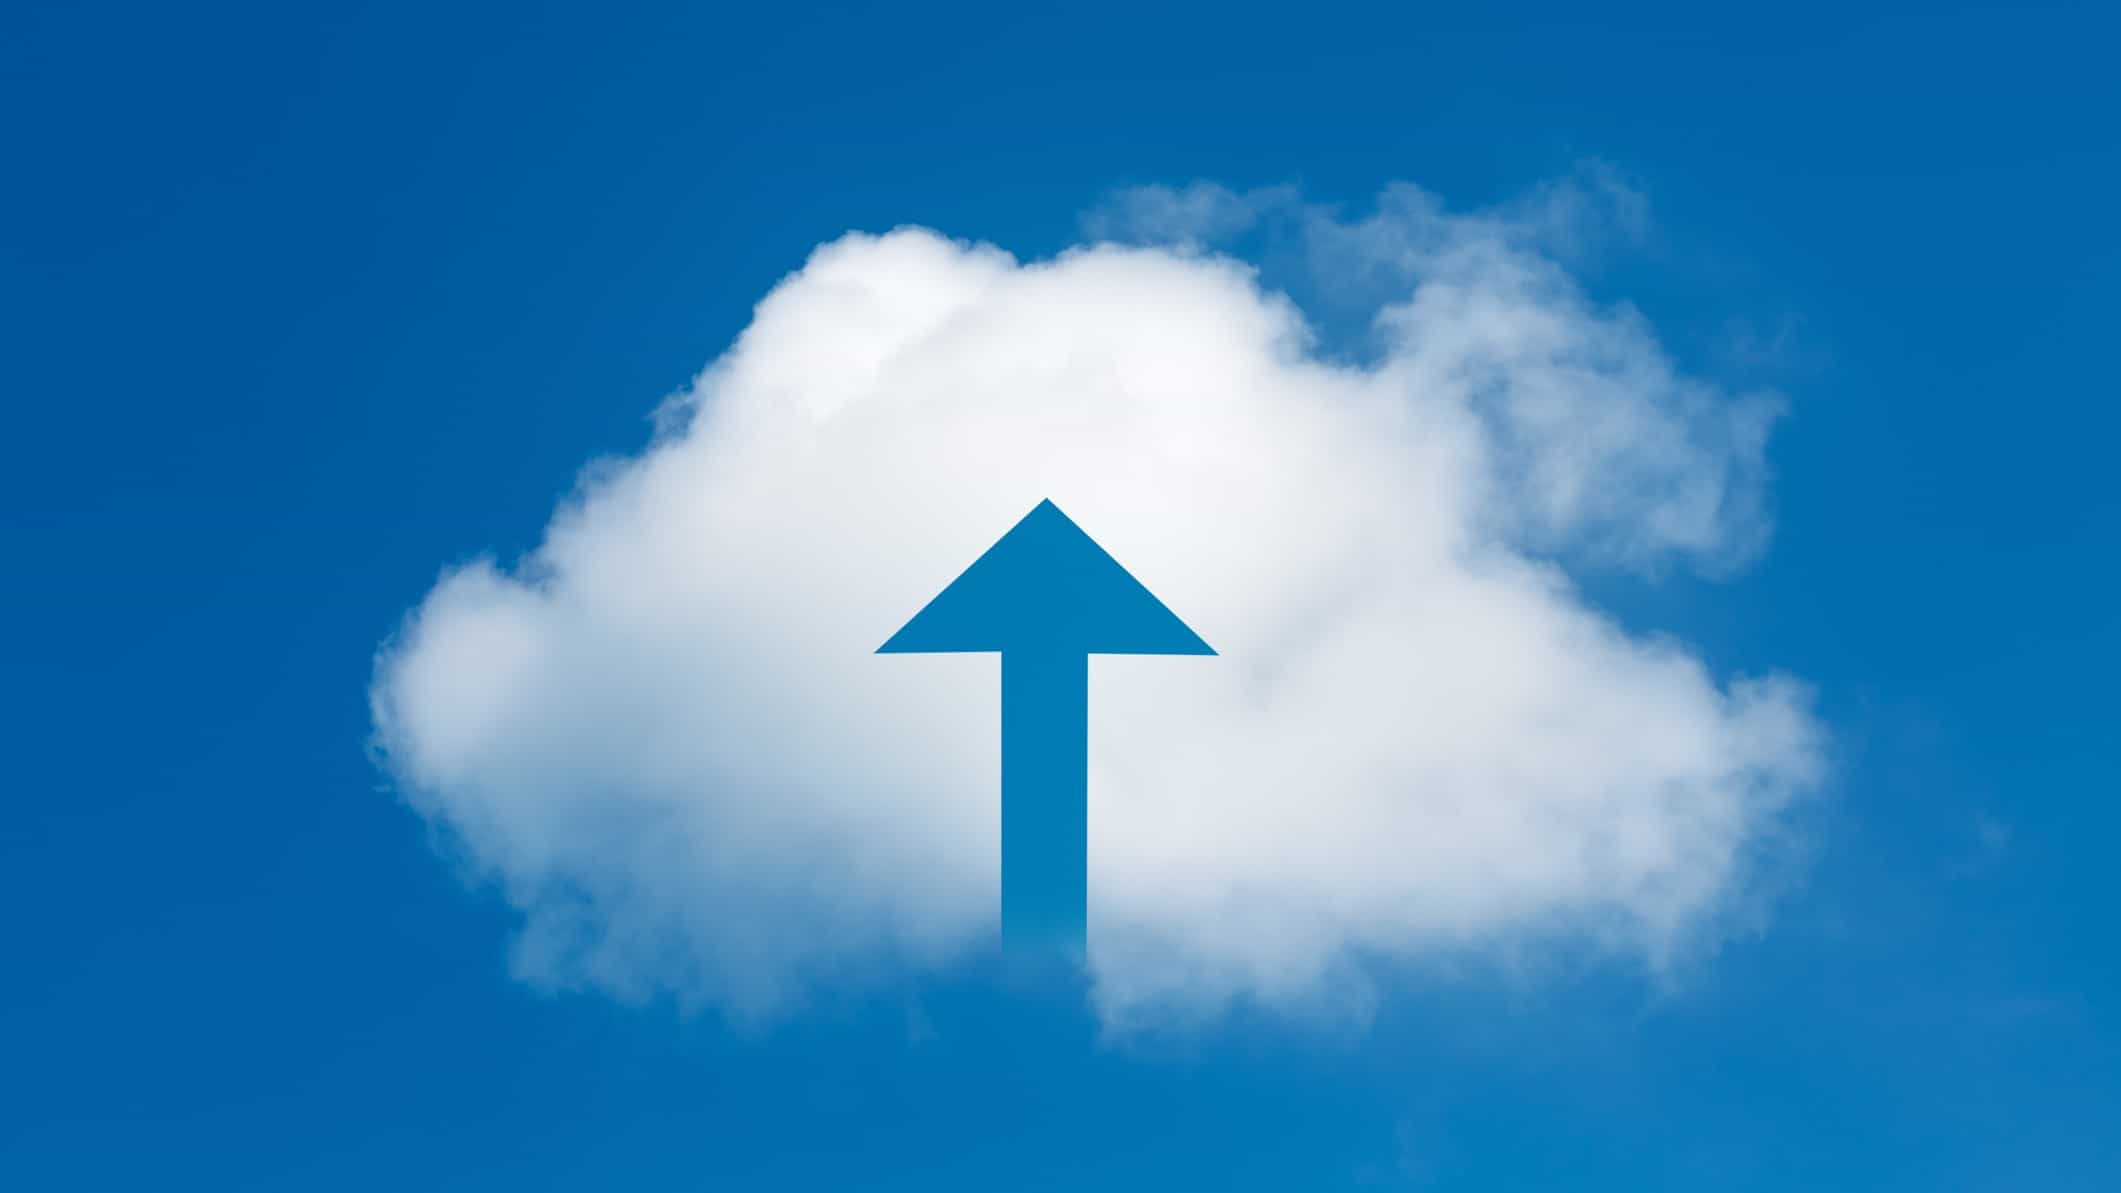 A cloud with a blue arrow pointing upwards through its middle symbolising a rising asx share price